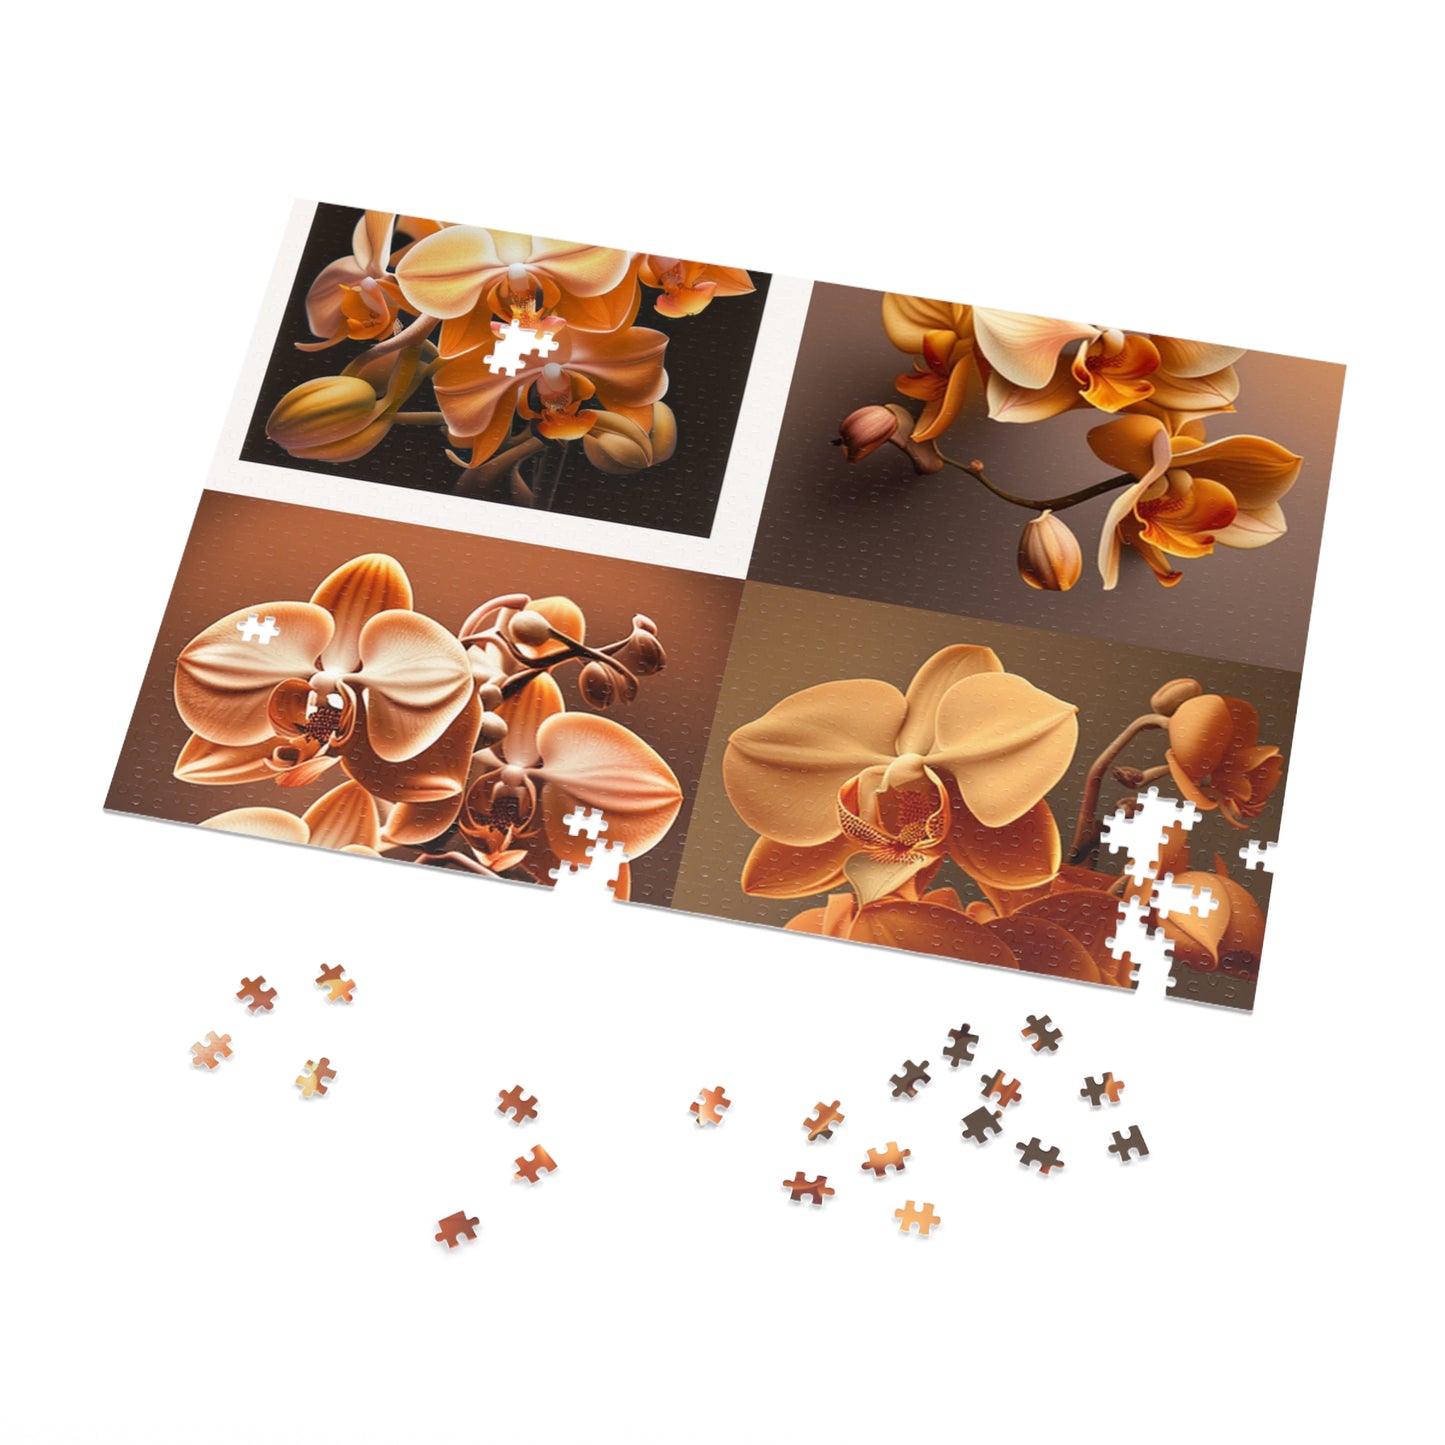 Jigsaw Puzzle (30, 110, 252, 500,1000-Piece) orchid pedals 5